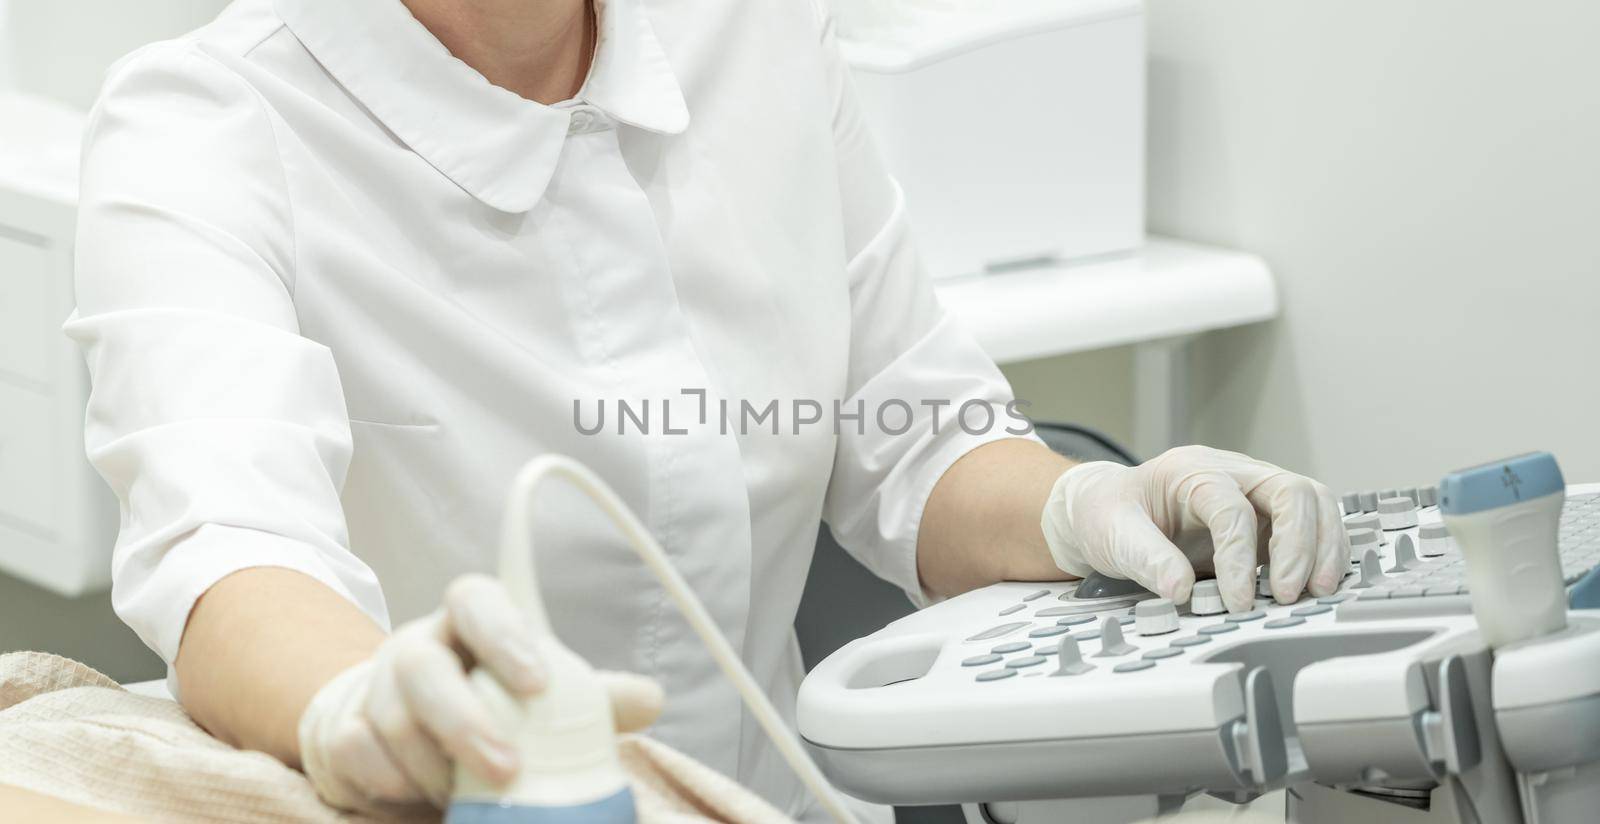 Doctor operating Ultrasound scanner for a patient diagnostic